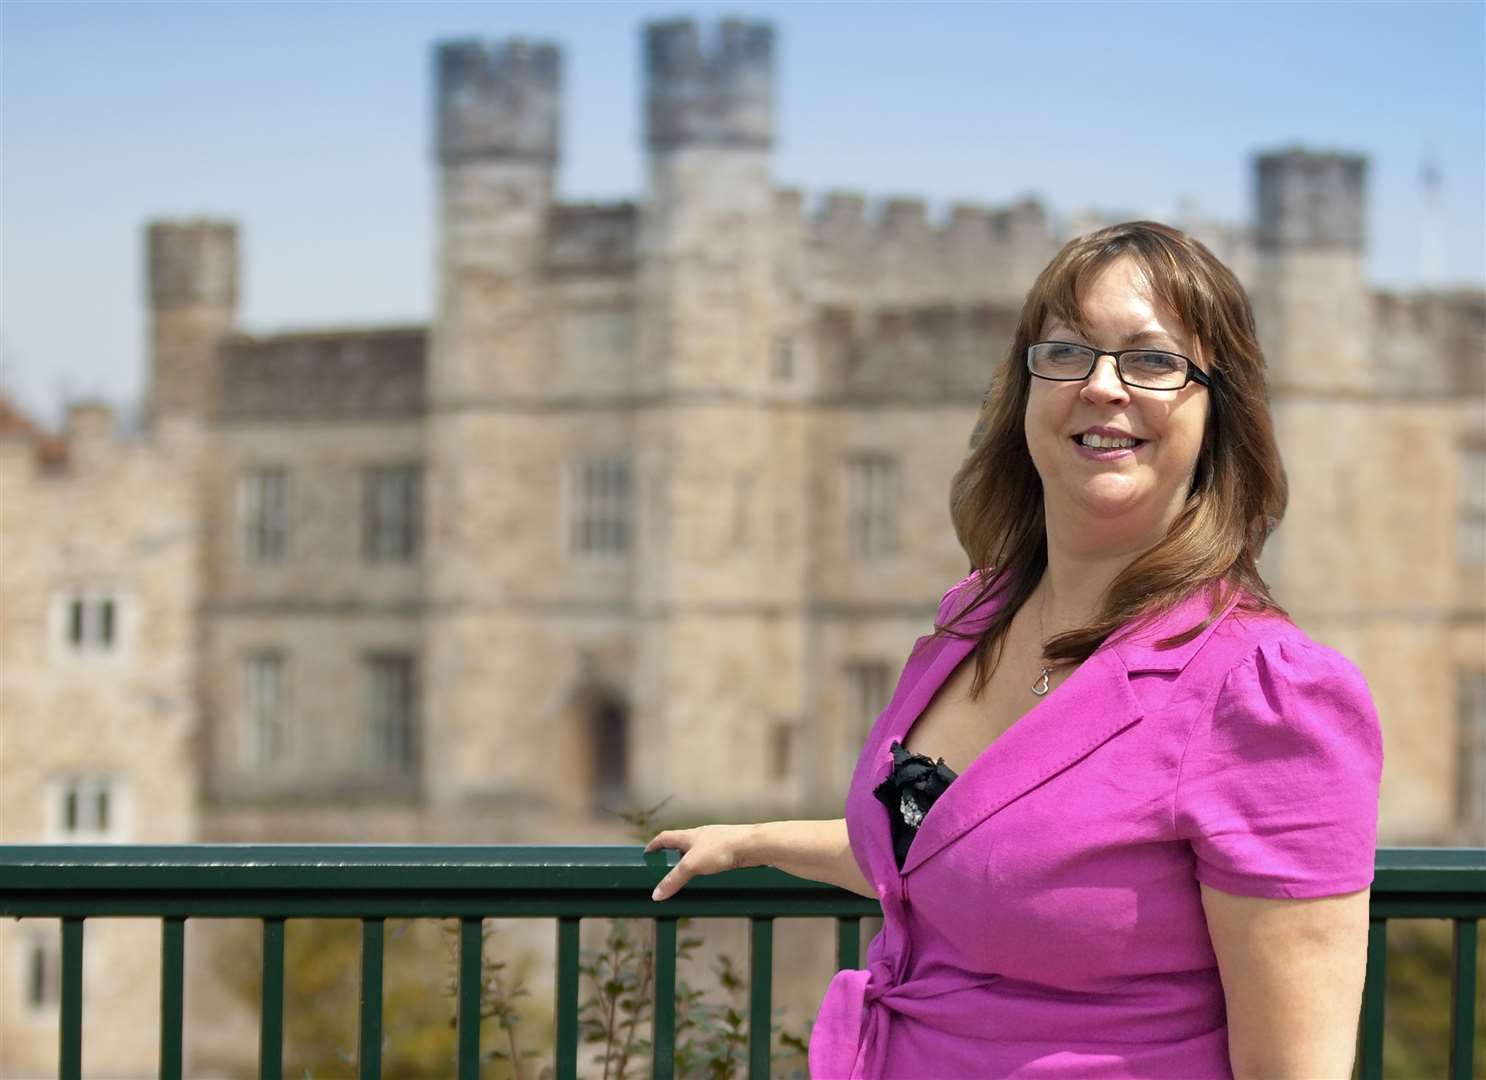 Helen Bonser Wilton is the new chief executive of the Leeds Castle Foundation